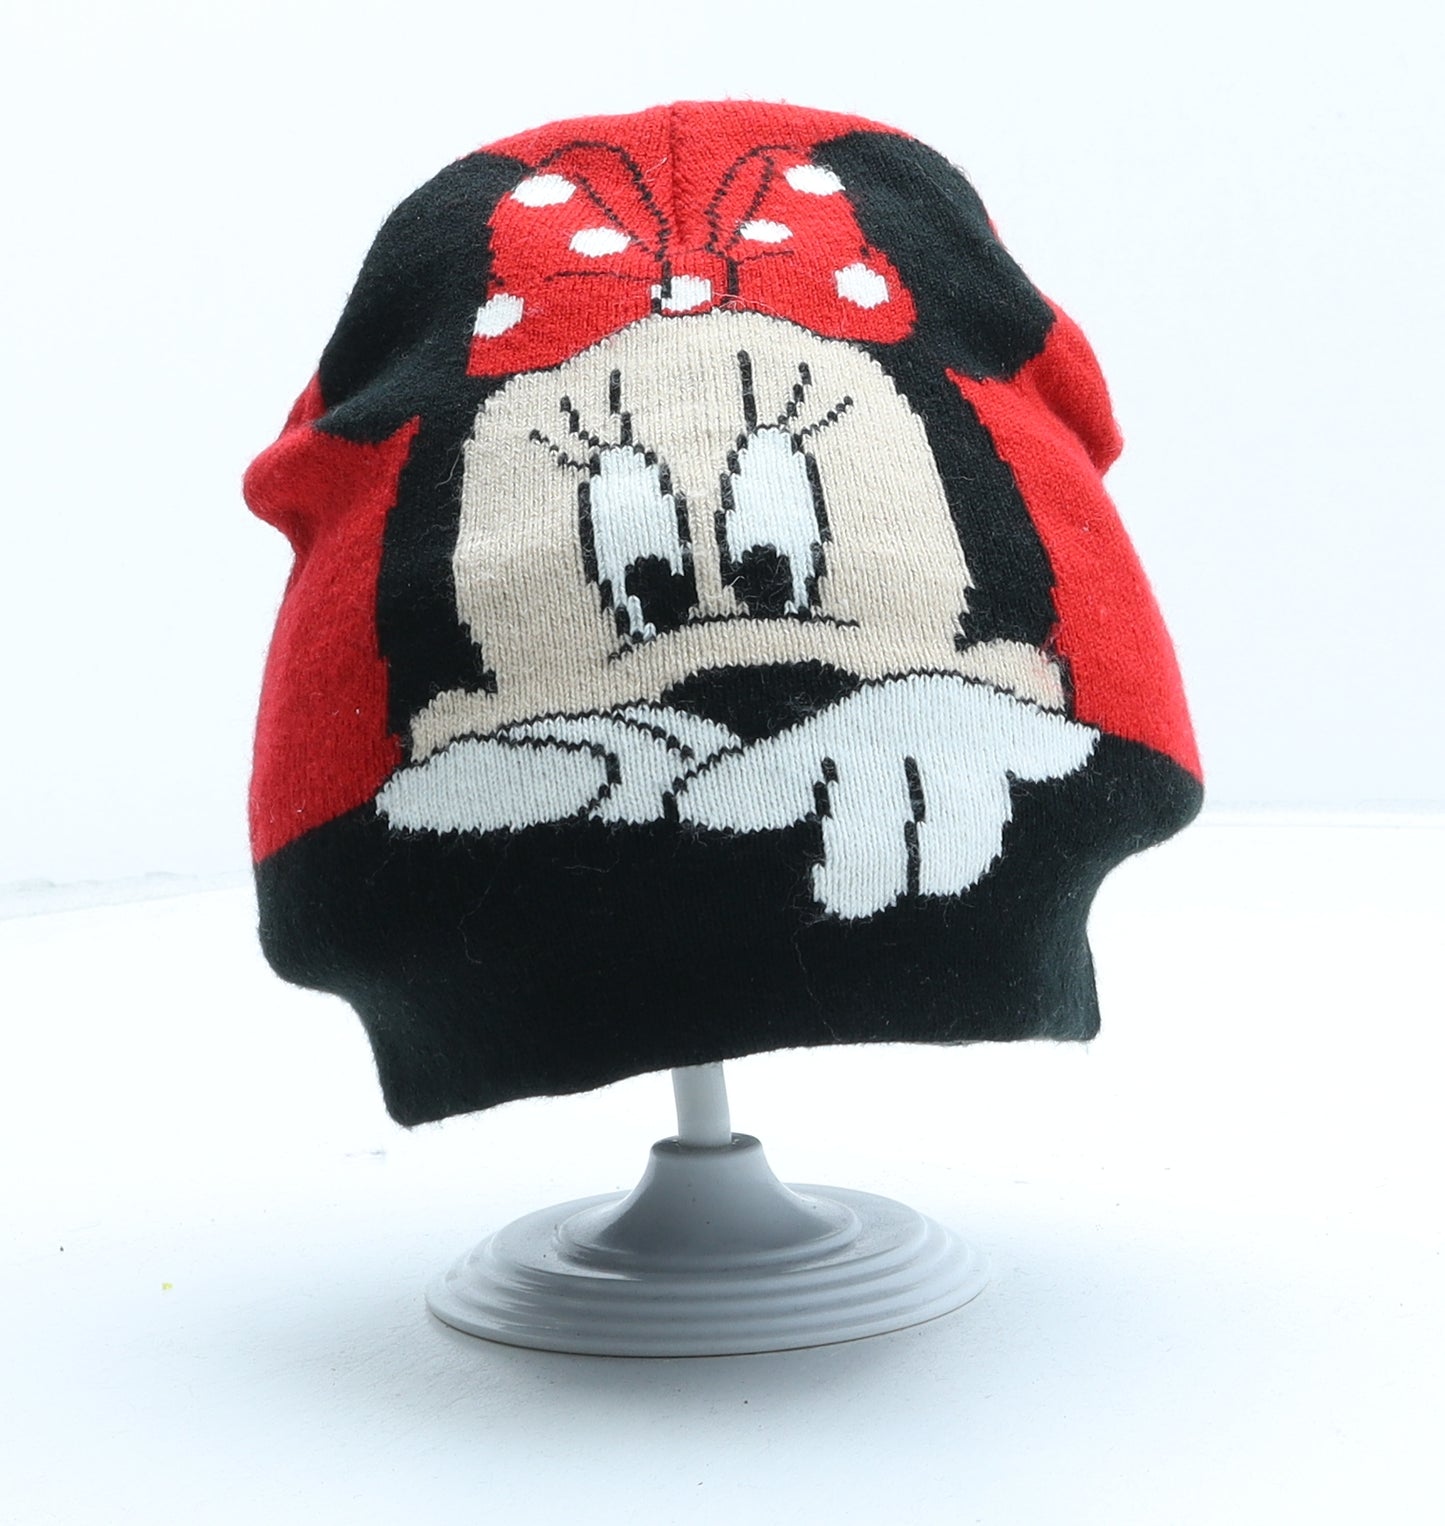 Young Dimension Girls Red Colourblock Acrylic Beanie One Size - Minnie mouse UK Size 3-6 Years